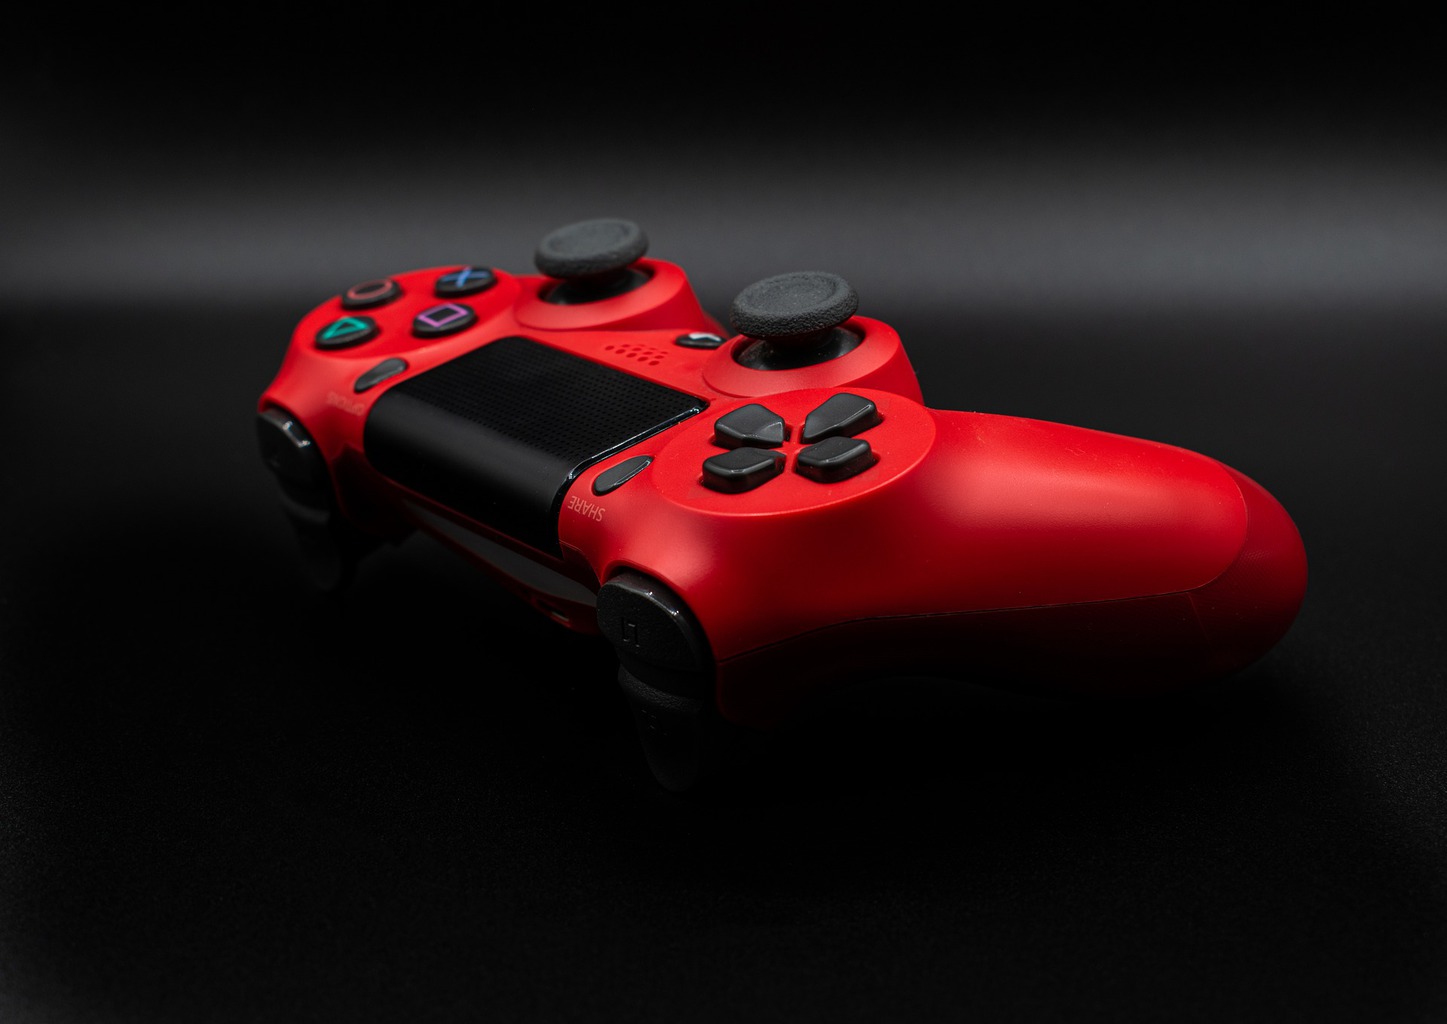 A red PS4 controller silicone skin